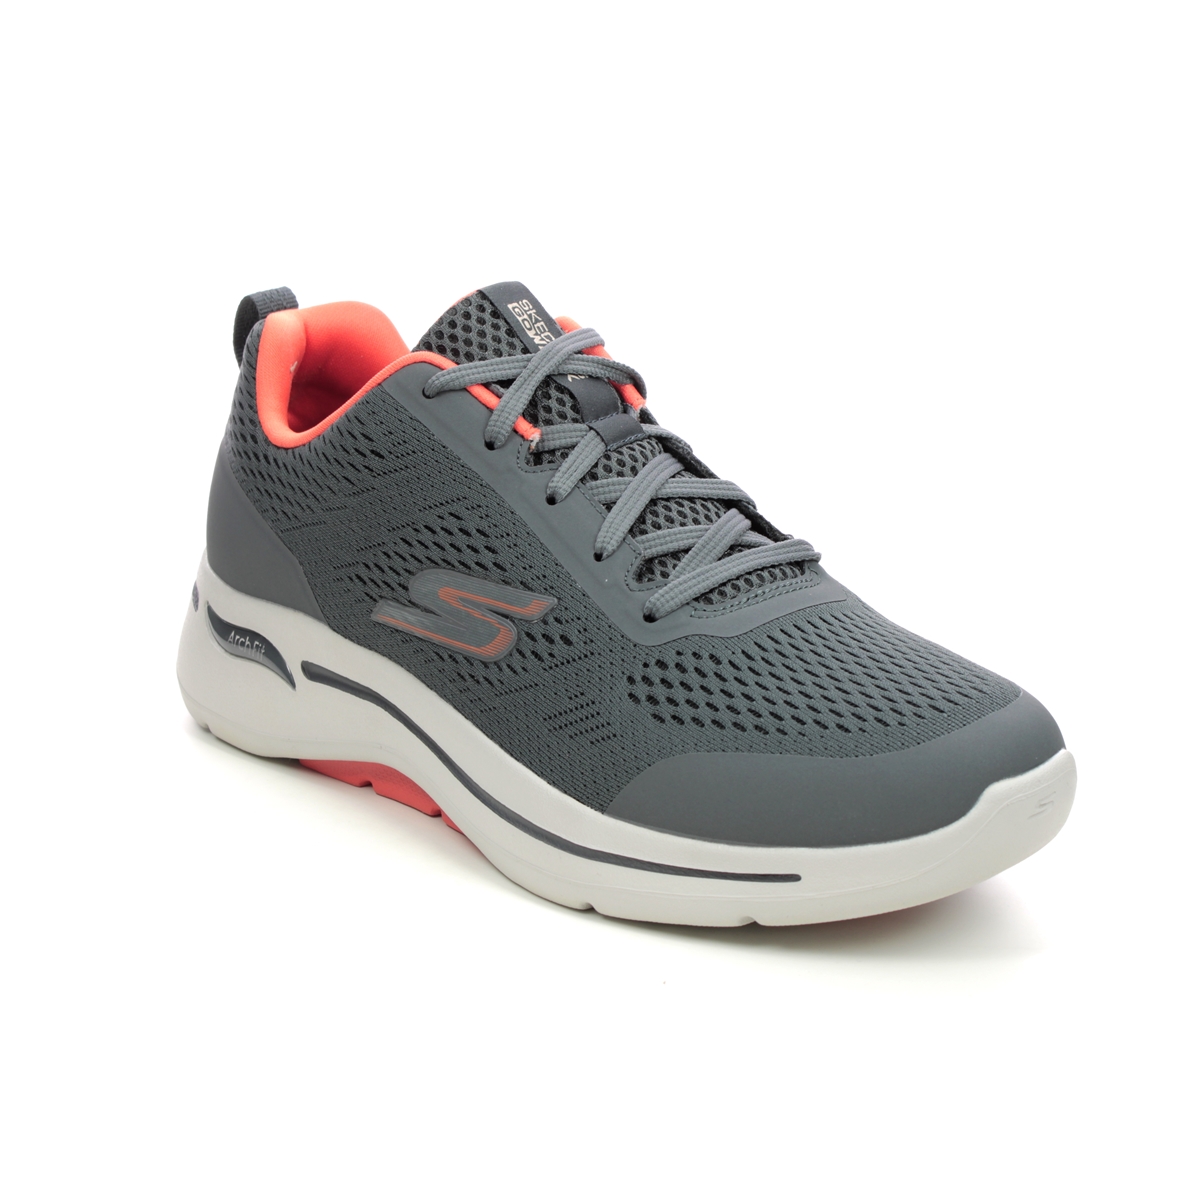 Skechers Arch Fit Go Walk Charcoal Grey Mens Trainers 216116 In Size 12 In Plain Charcoal Grey